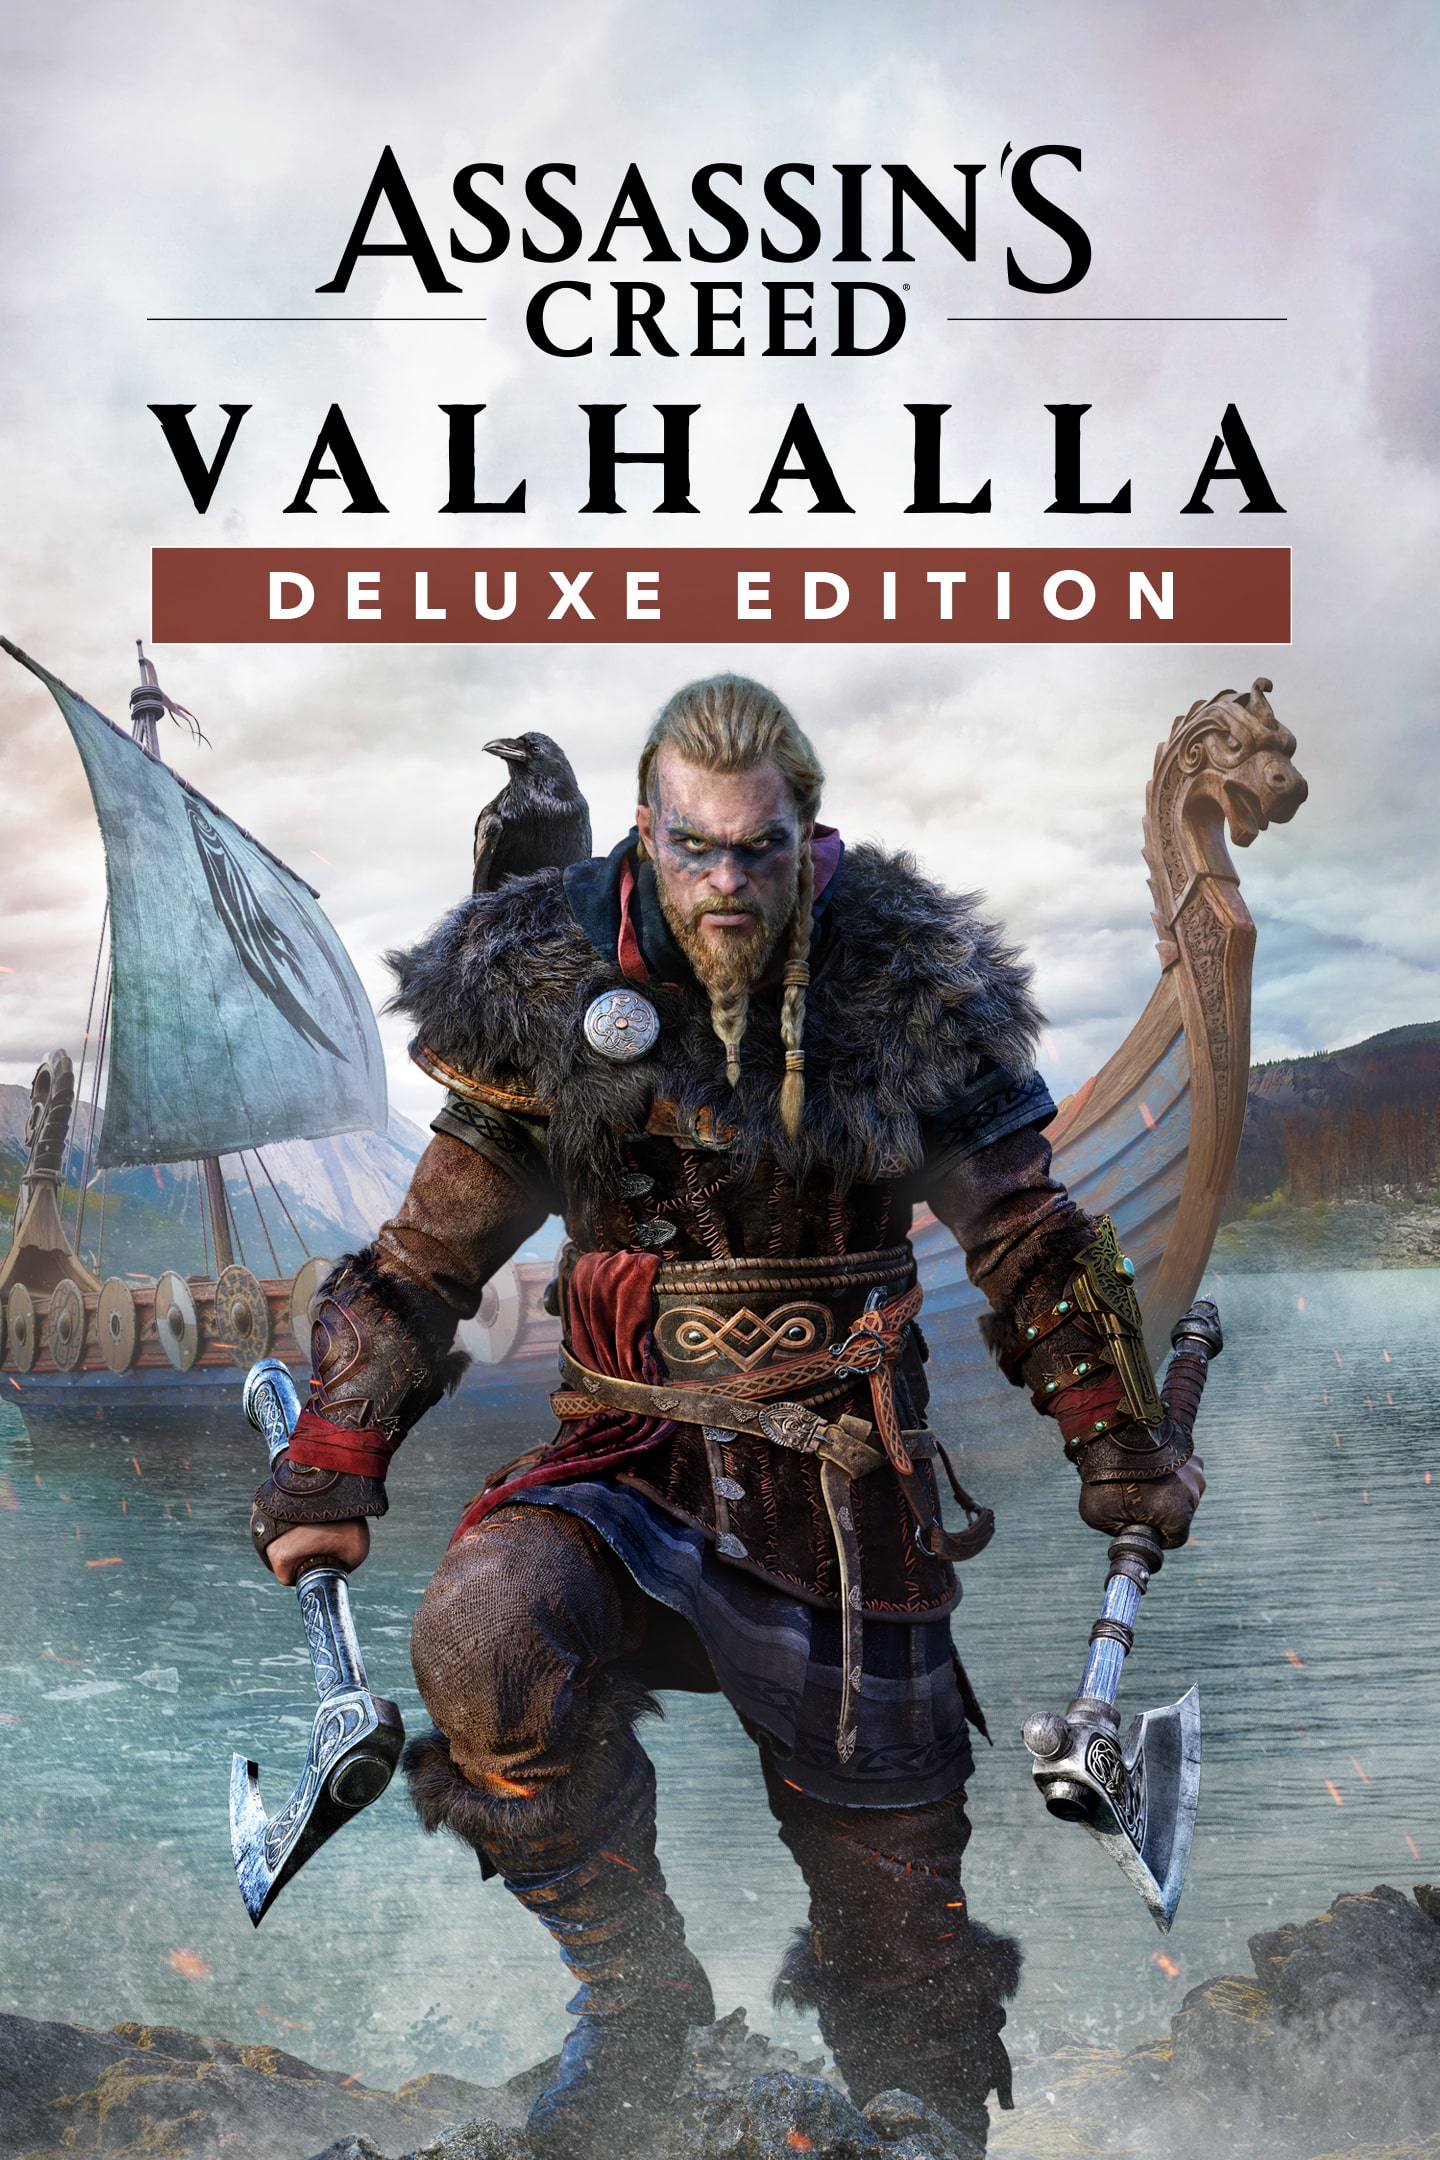 Assassin's Creed Valhalla Deluxe Edition for PS4/PS5 (Digital) Buy